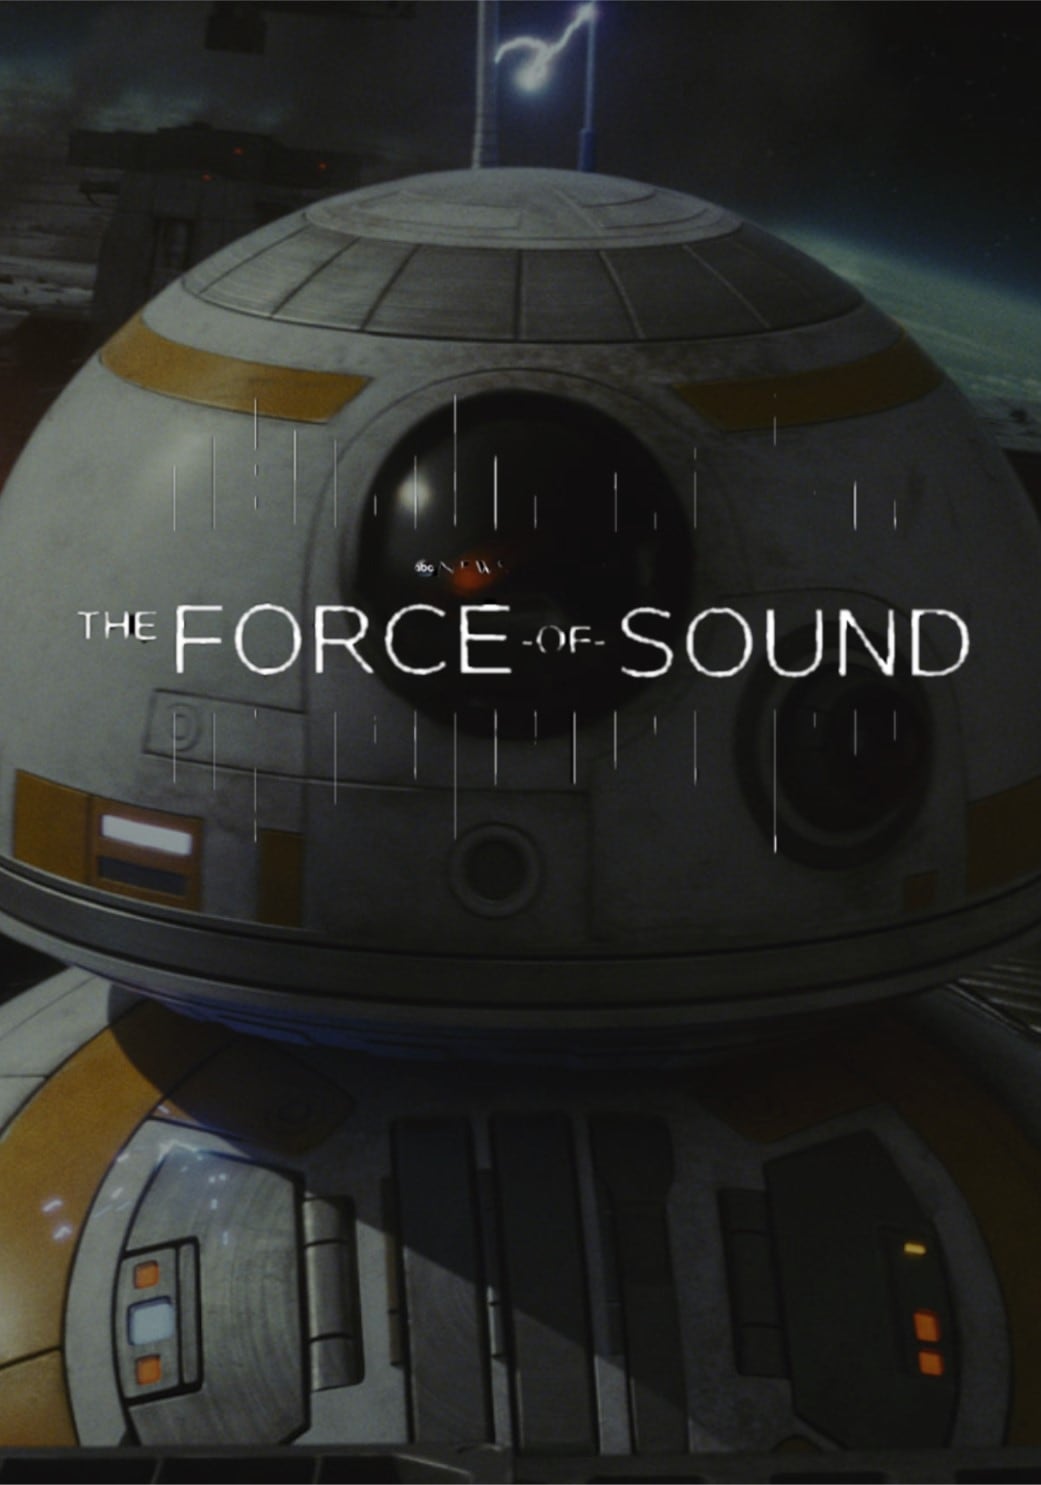 The Force of Sound film